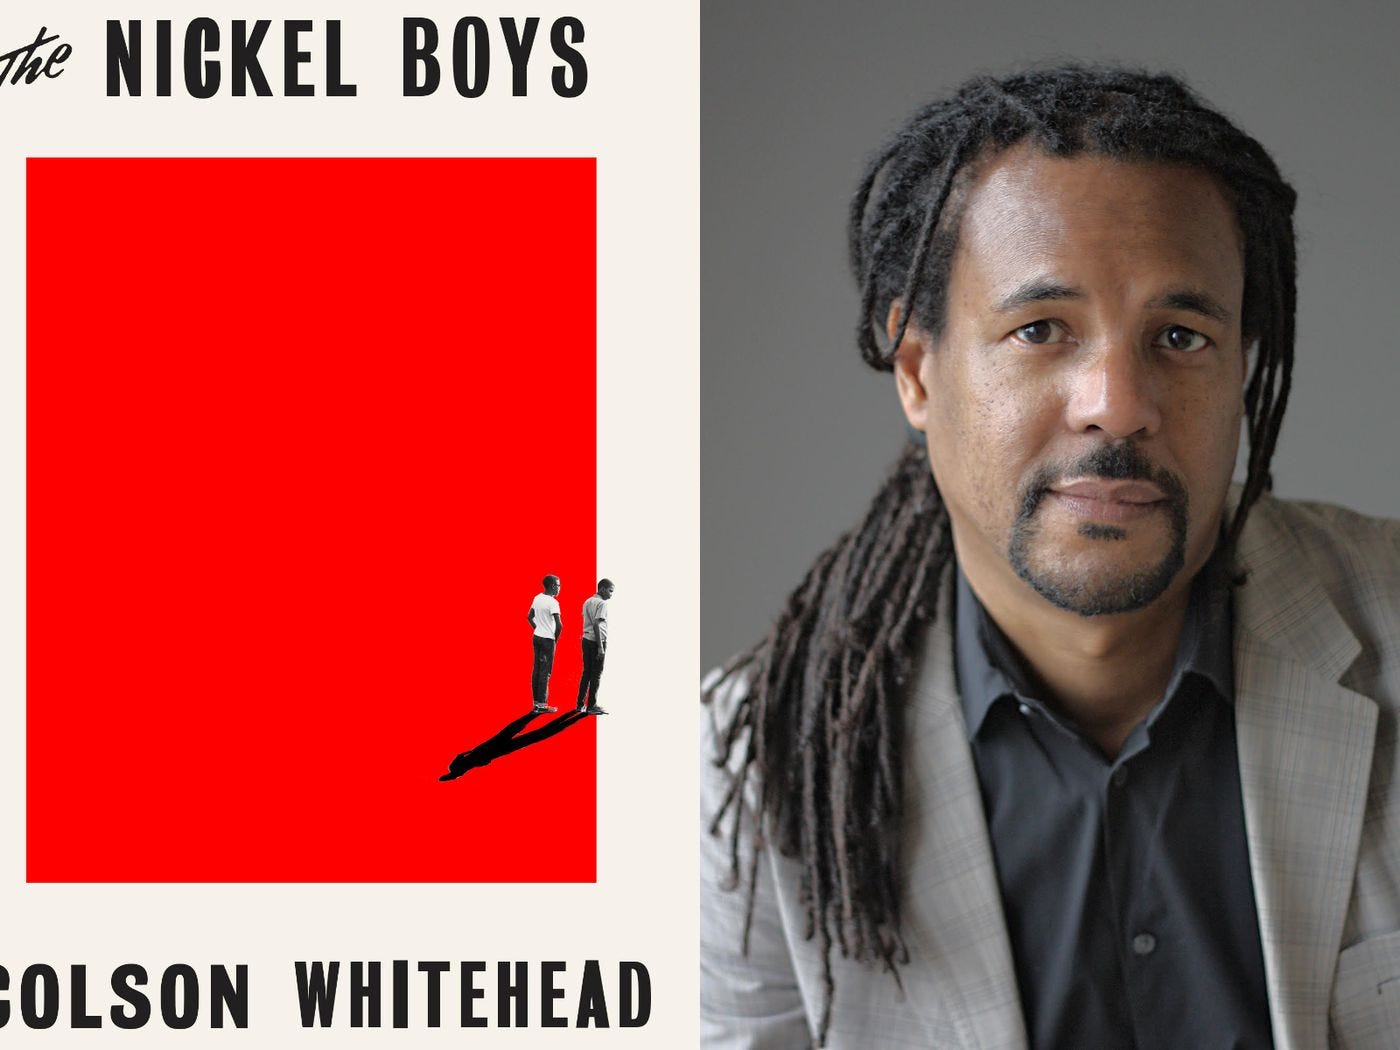 Nickel Boys review: Colson Whitehead's novel is spare and riveting - Vox